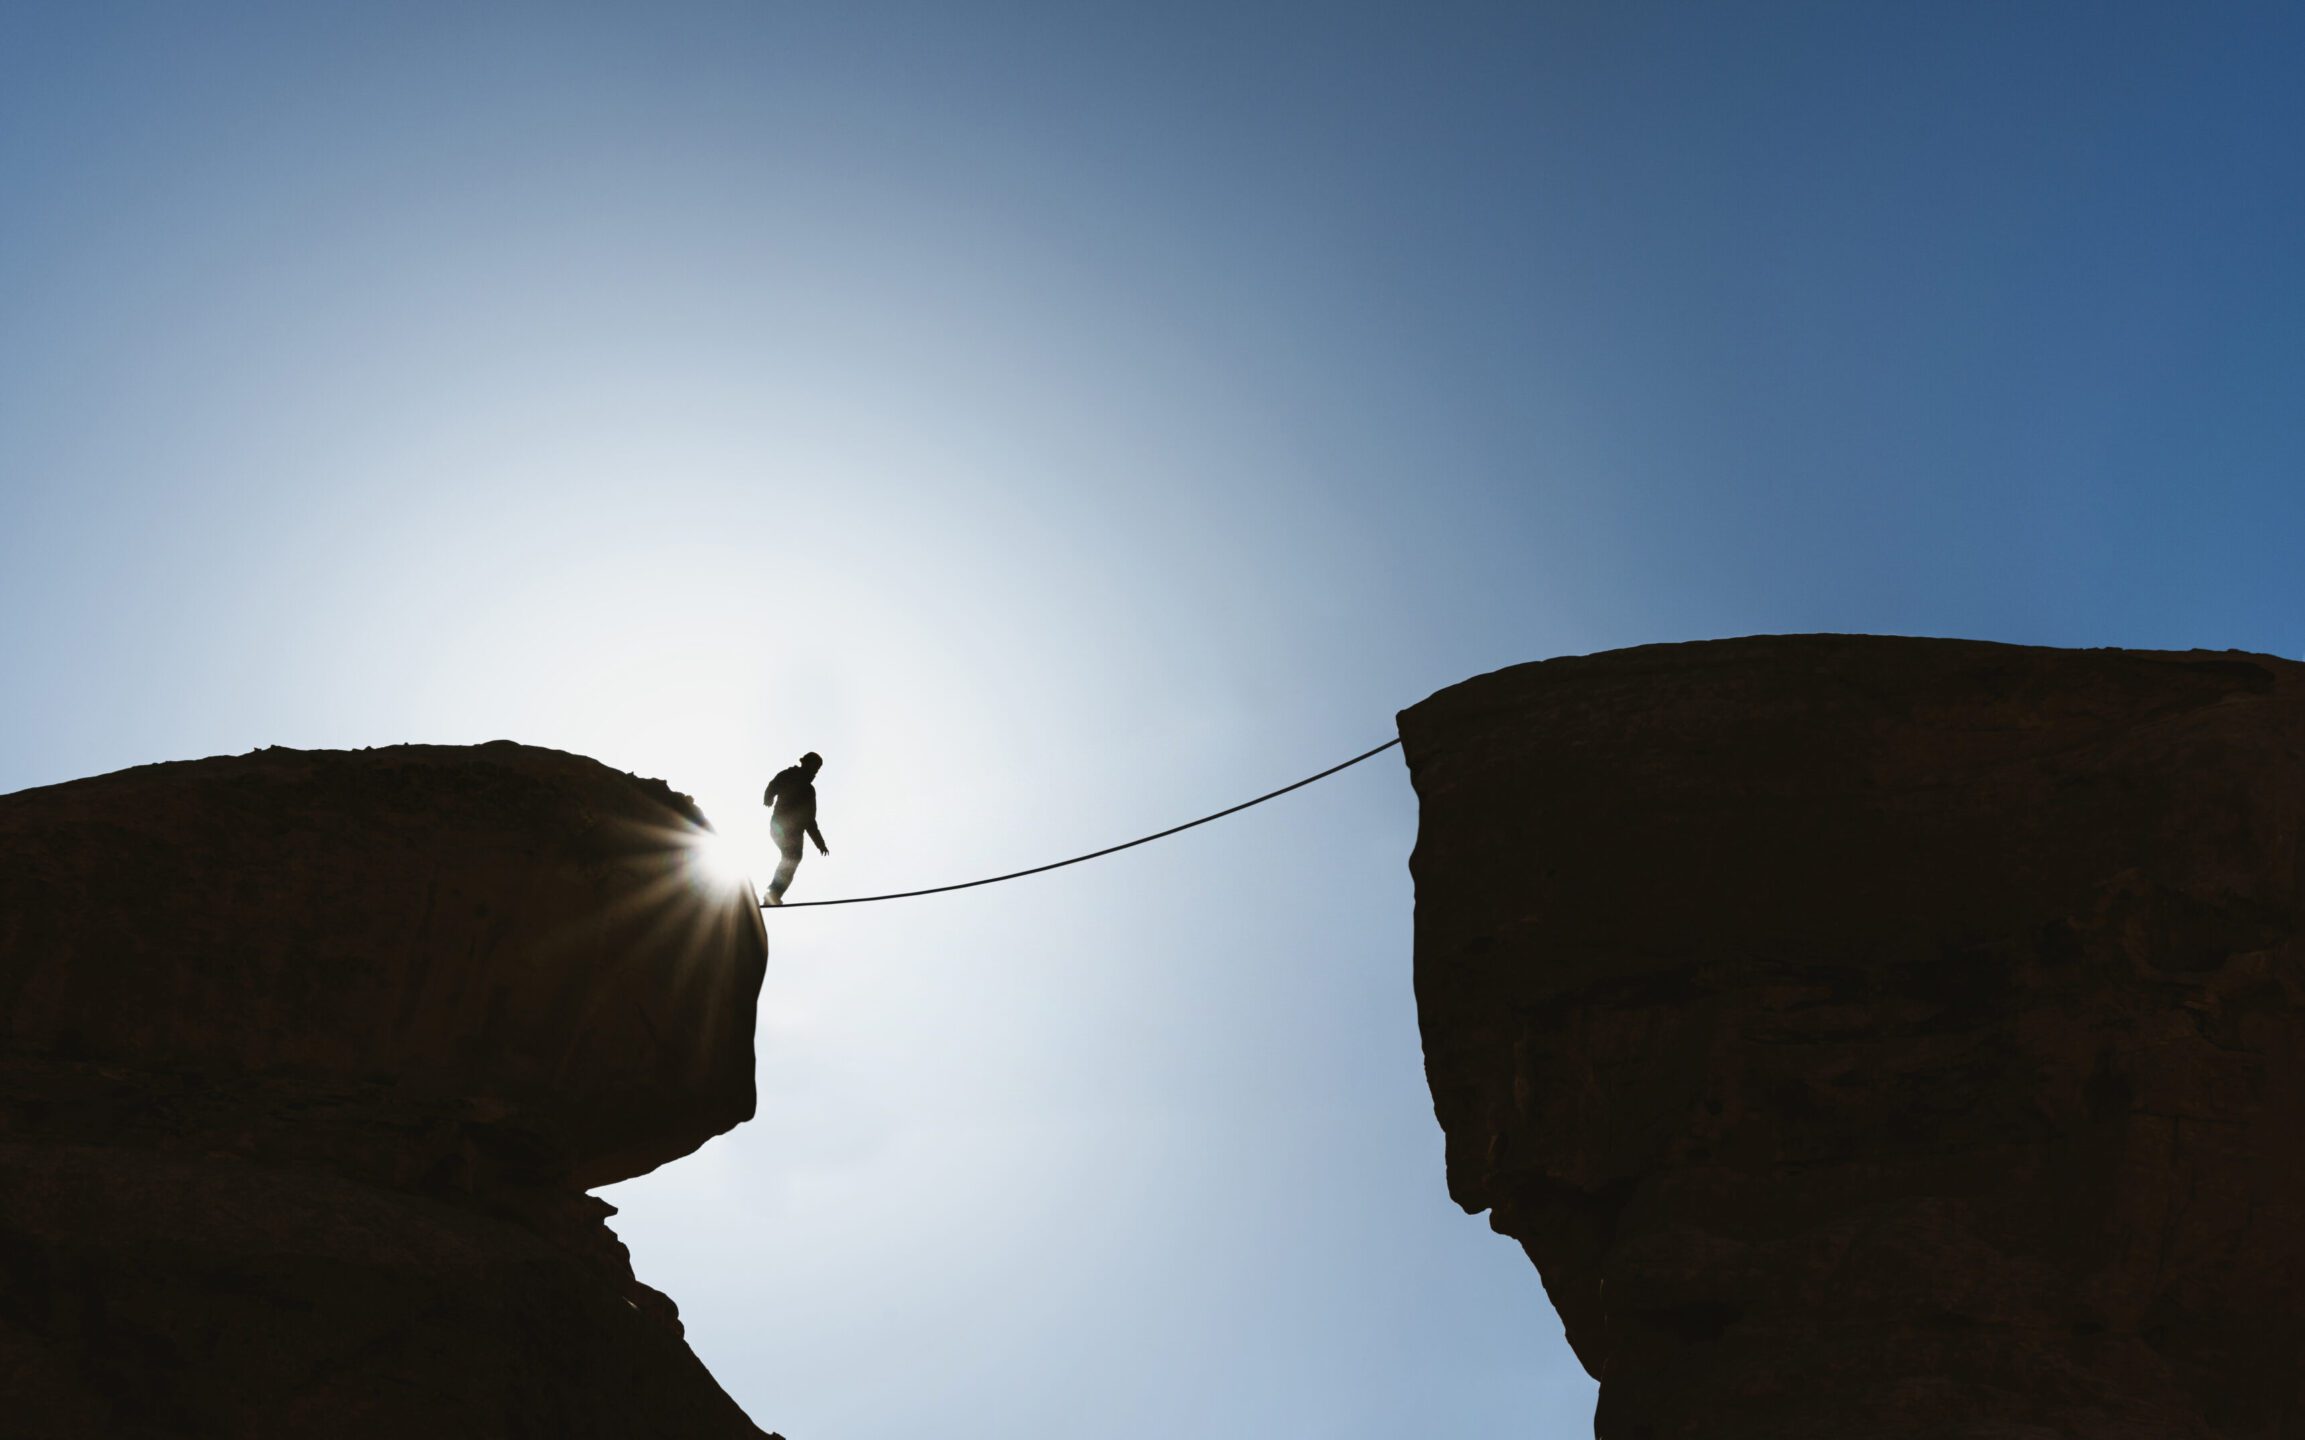 Man on rope high between two cliffs
